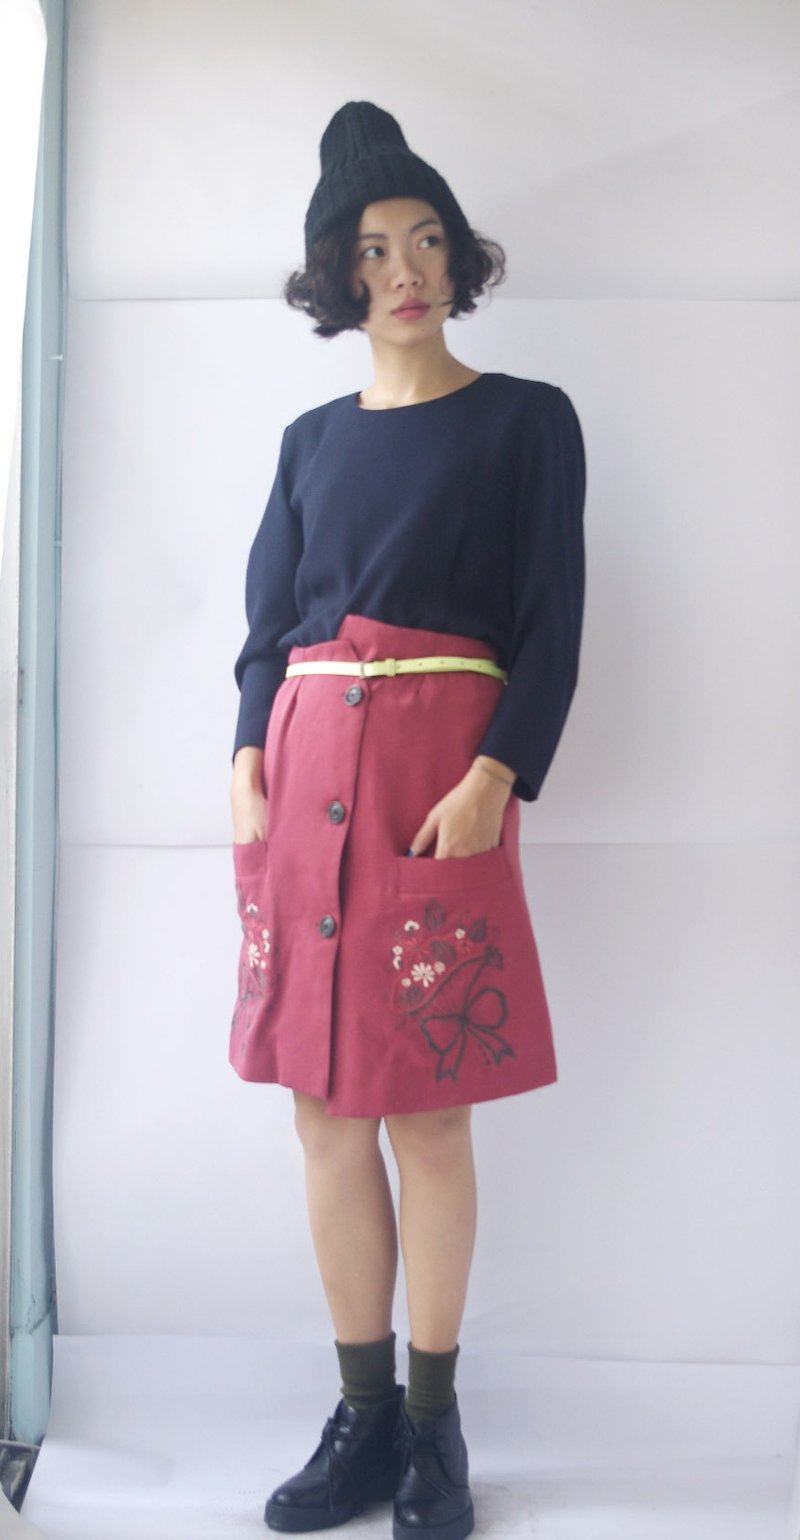 4.5studio- [Re;] - resyle transformation vintage - MEI large pockets embroidered a skirt - Skirts - Polyester Pink